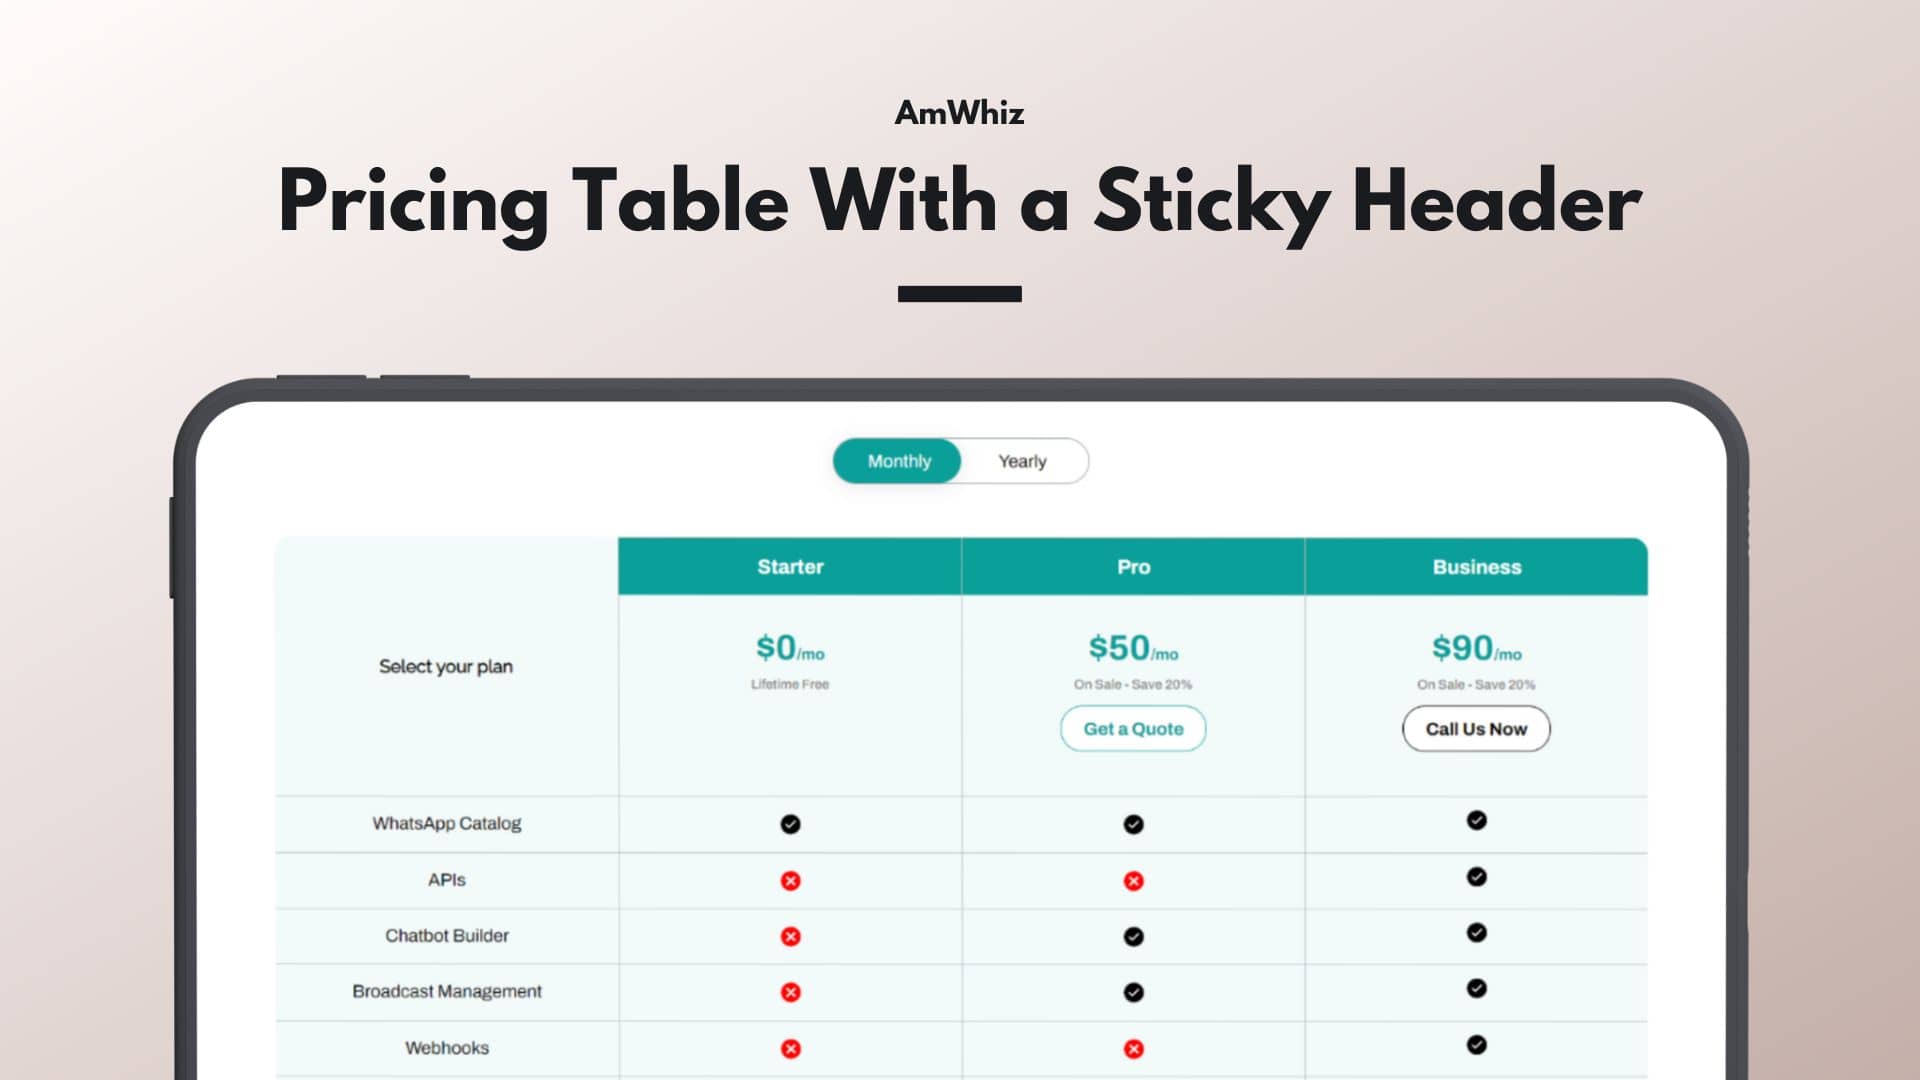 Pricing Table With a Sticky Header